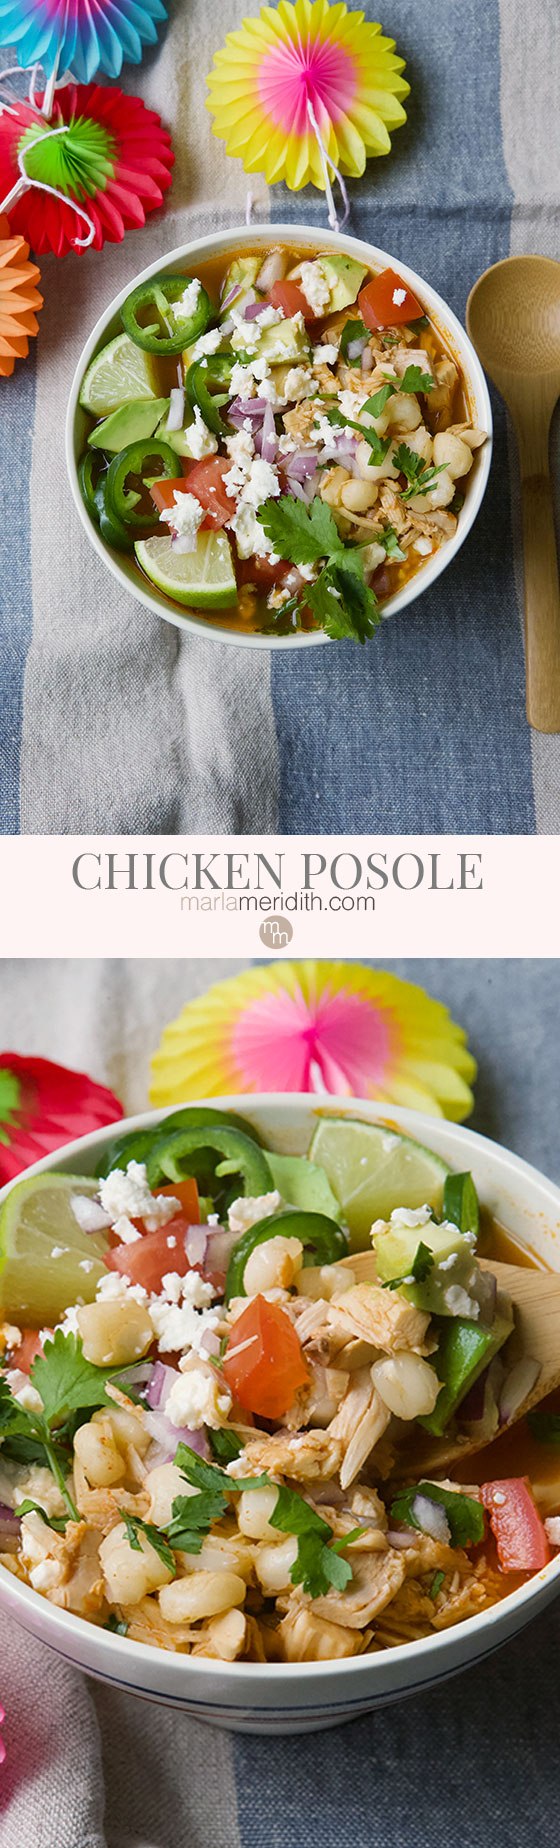 Posole or Pozole is a traditional soup or stew from Mexico. It's the perfect dish for the cooler months as it warms you from the inside out. This Chicken Posole recipe is the perfect family meal! MarlaMeridith.com